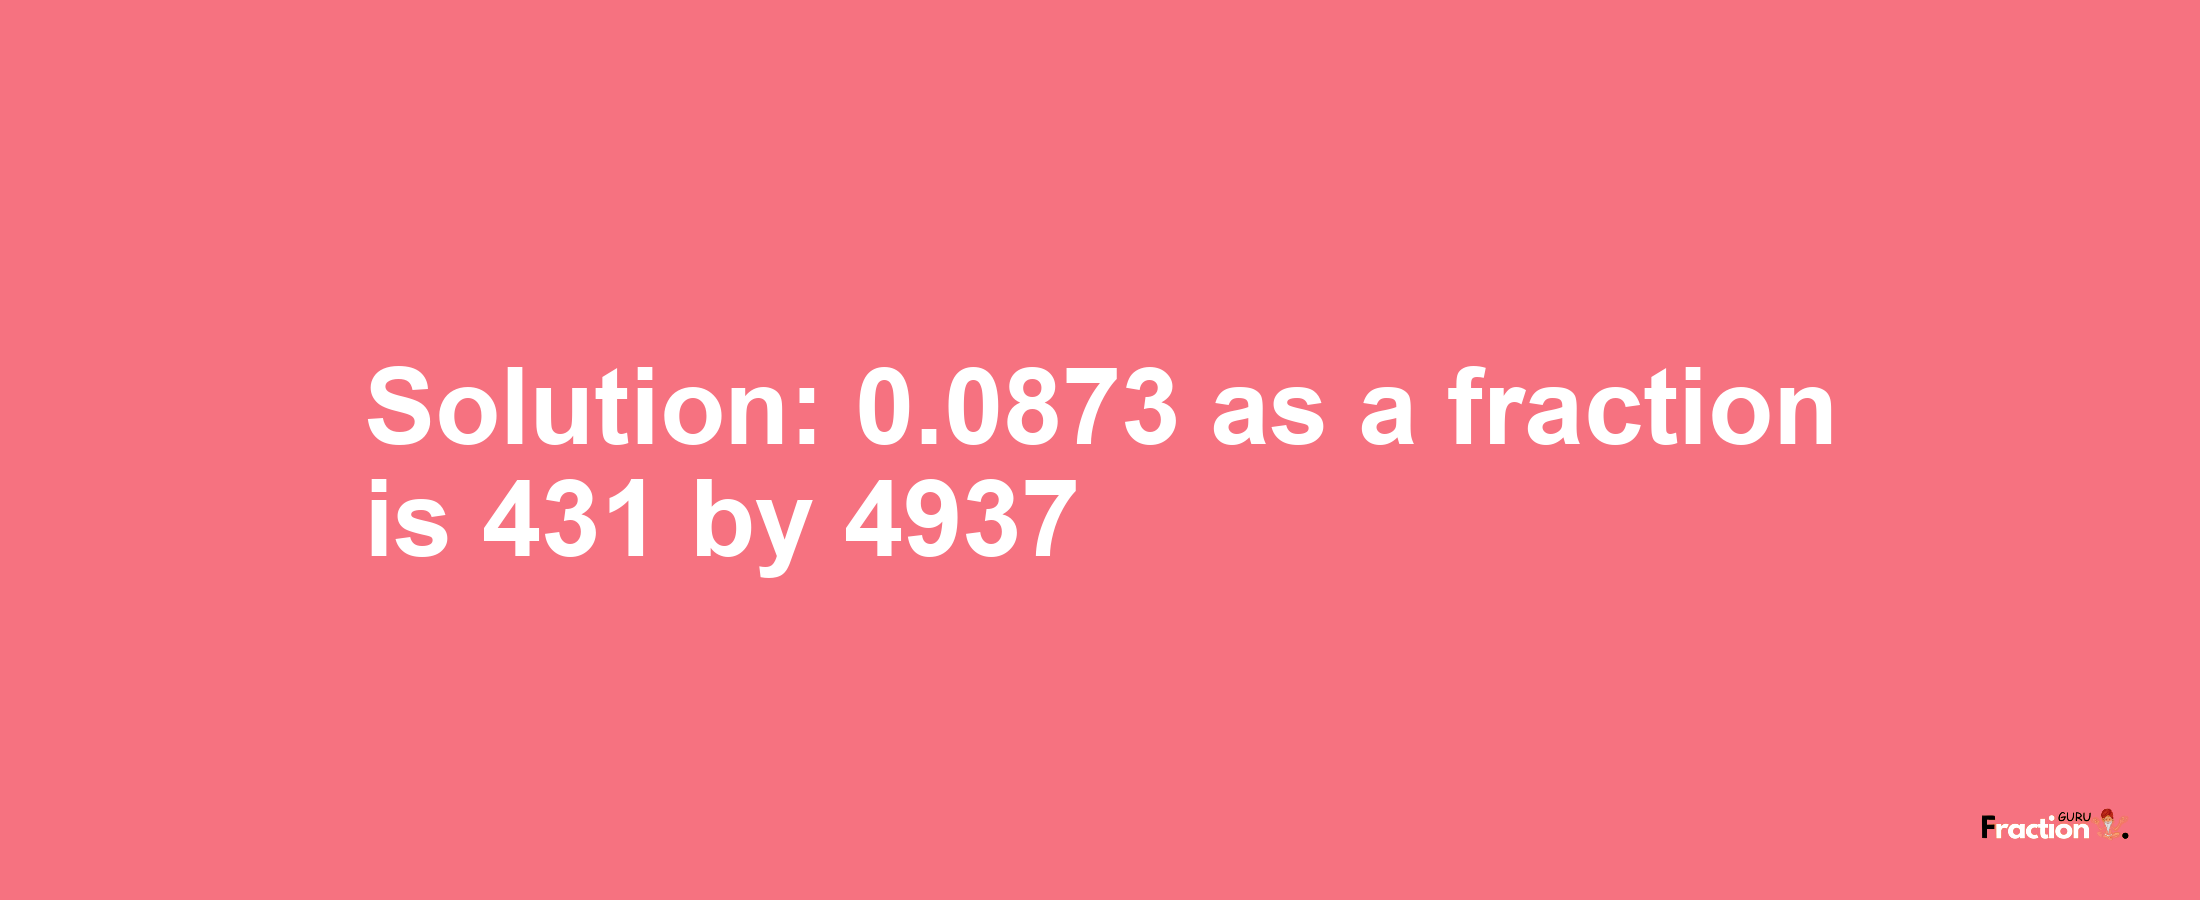 Solution:0.0873 as a fraction is 431/4937